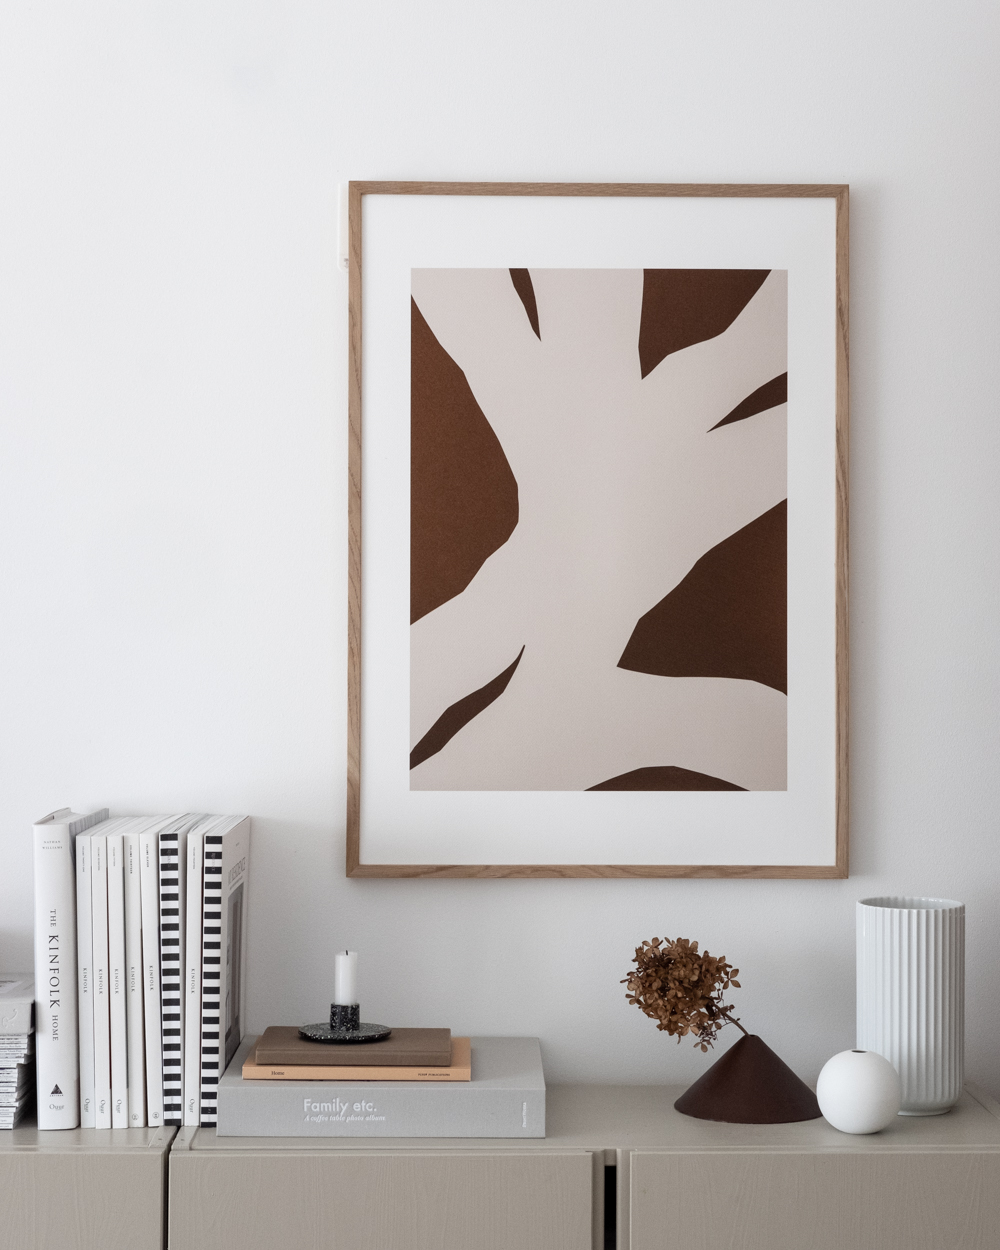 Anu Reinson's first collection of fine art prints is a reflection of her soft minimalist style